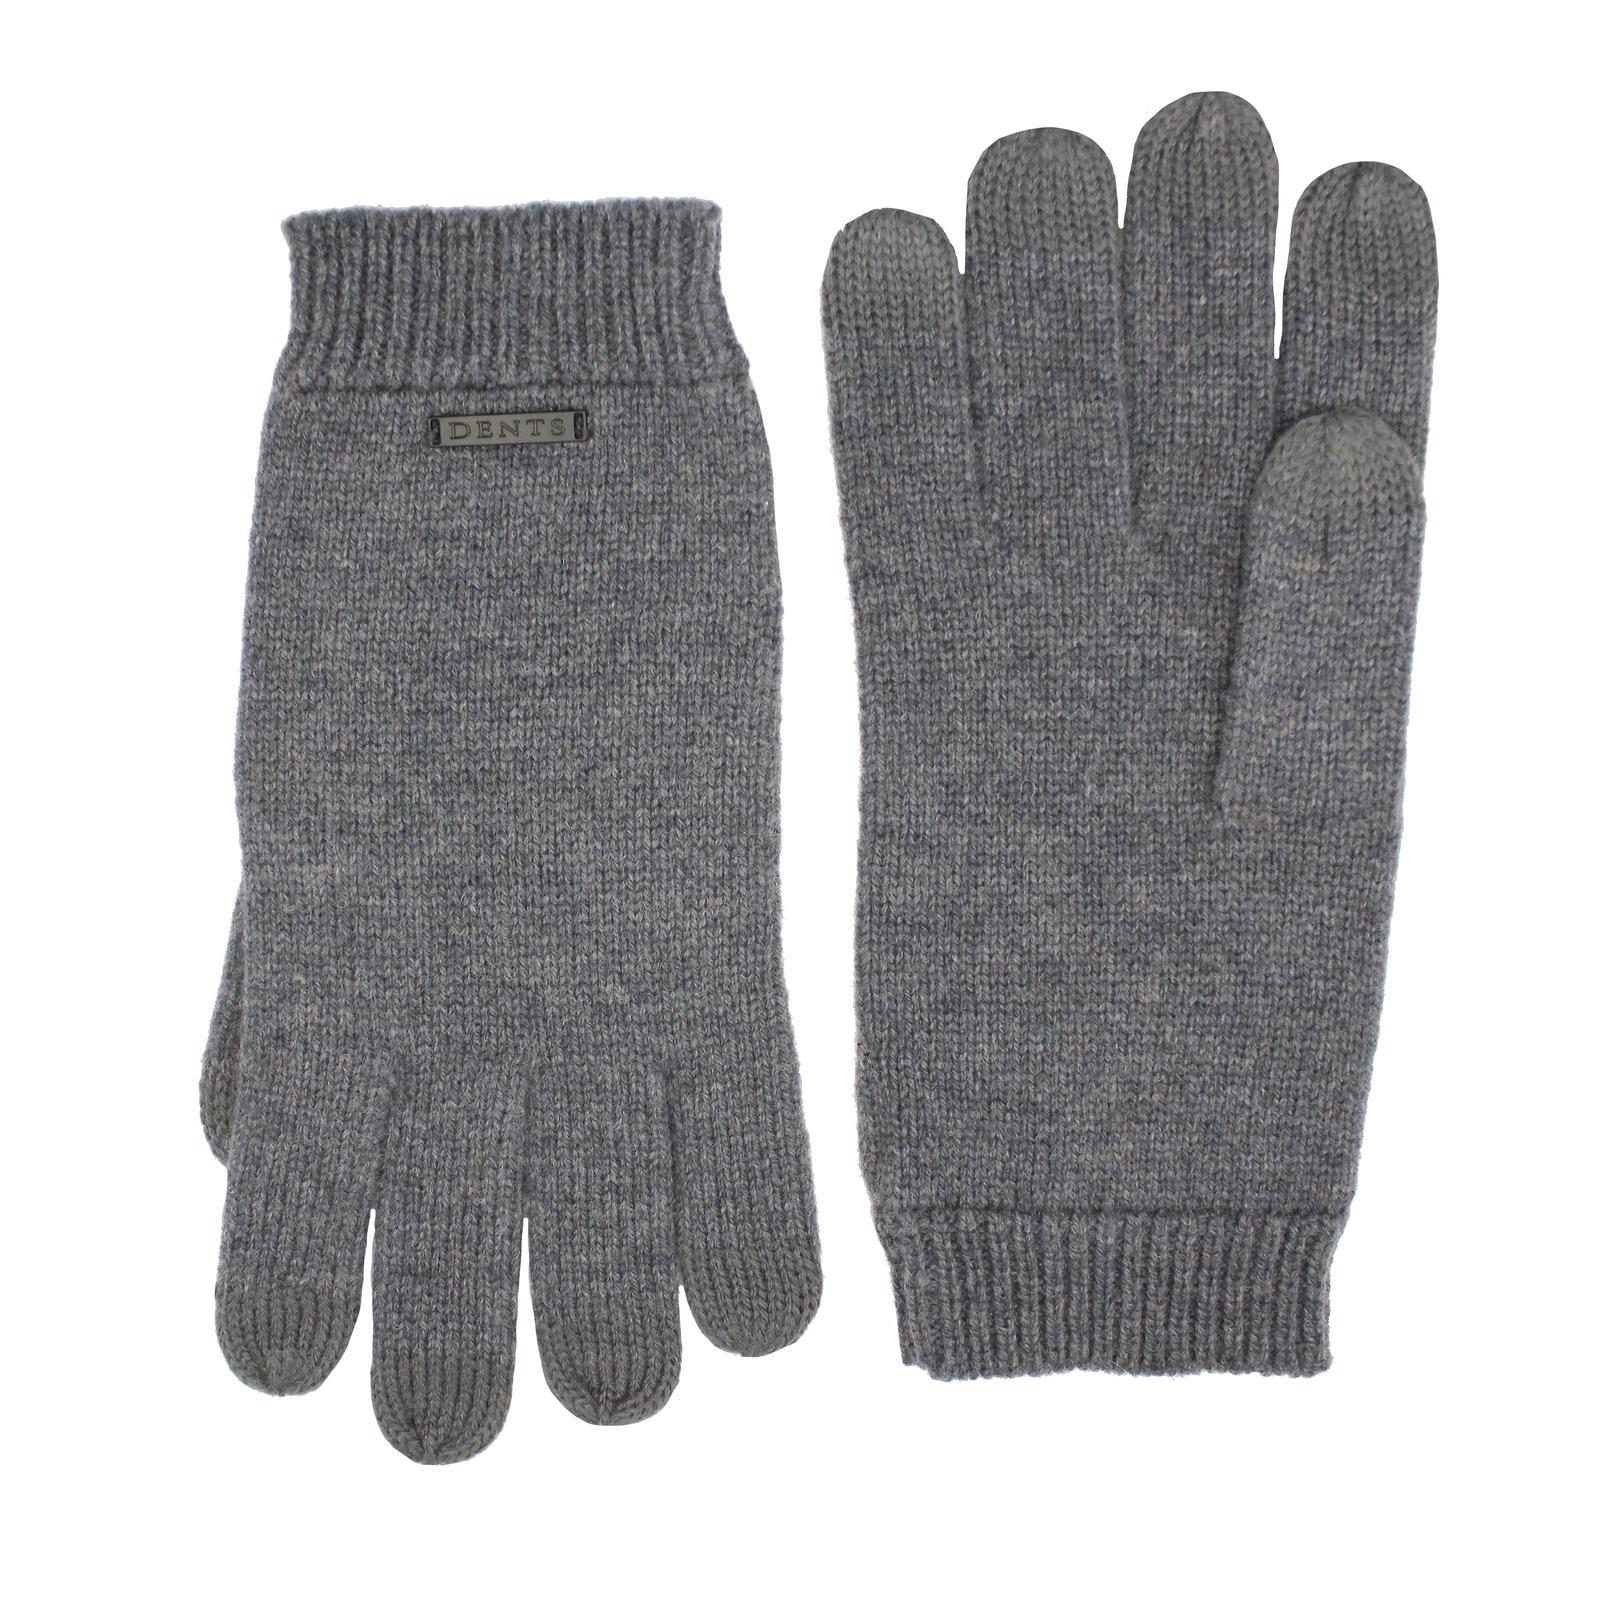 Dents Mens Pure Merino Wool Touchscreen Gloves - Shale - M